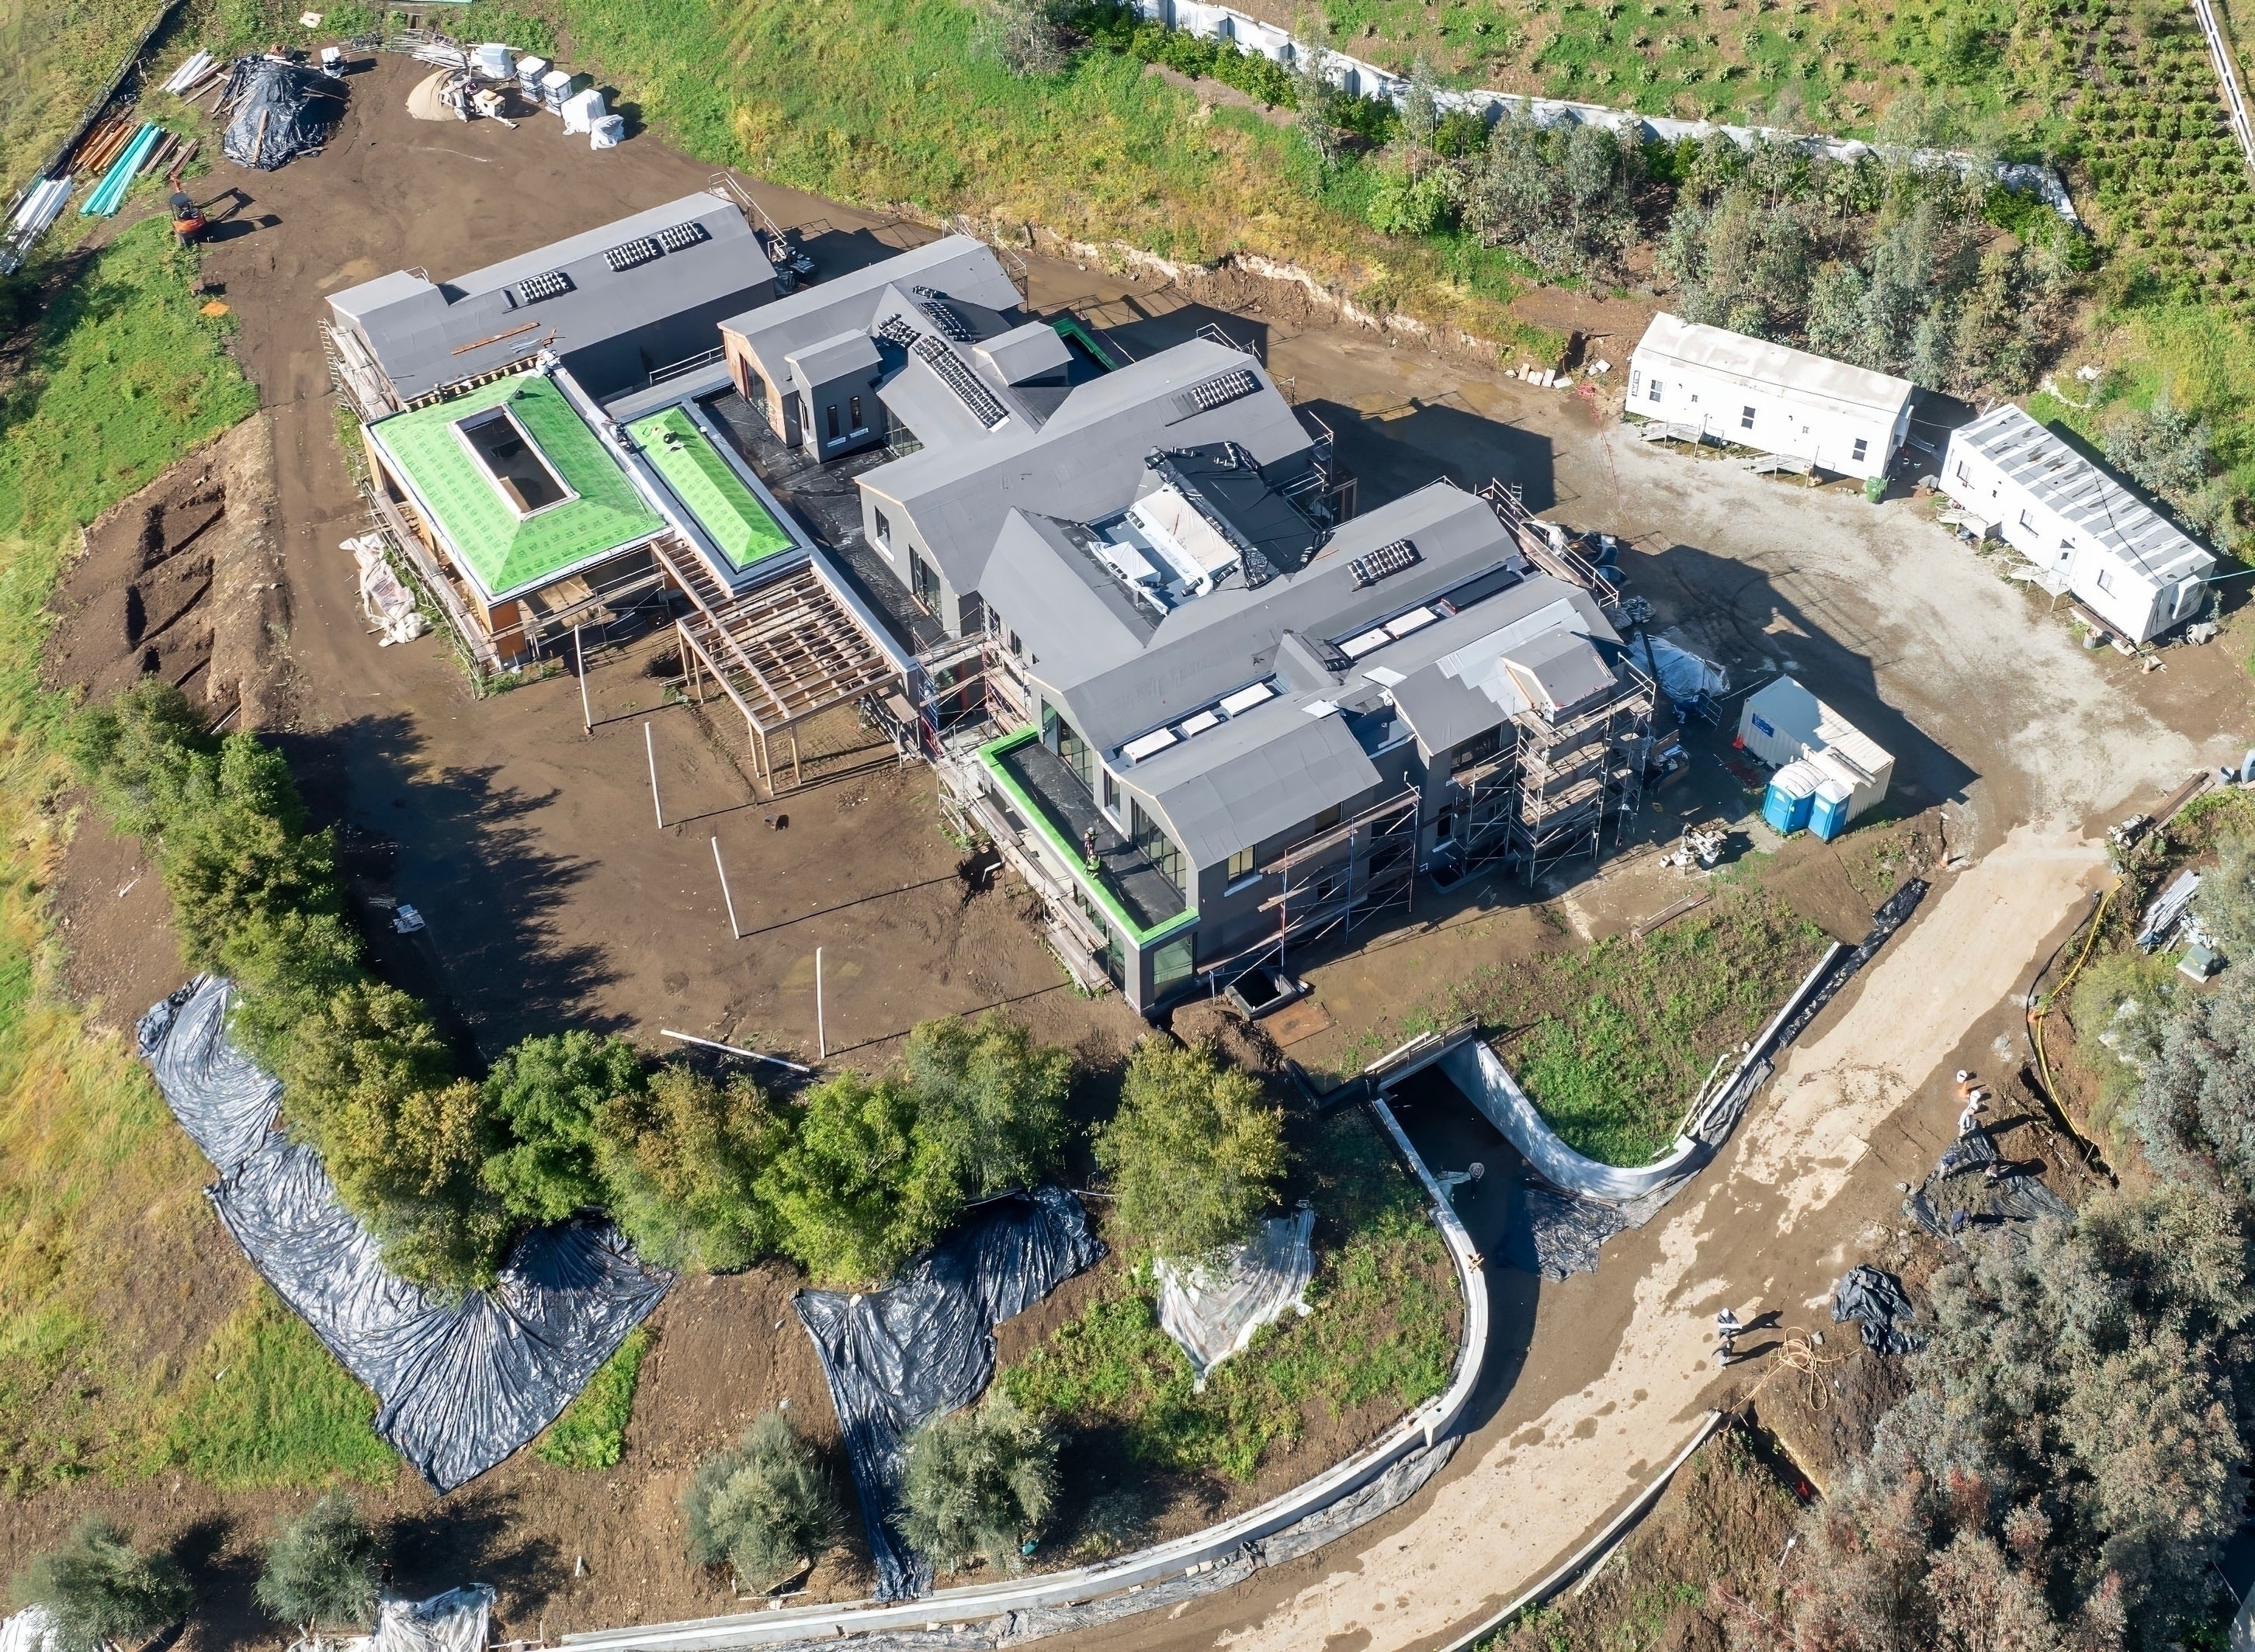 New aerial photos of her compound show great progress